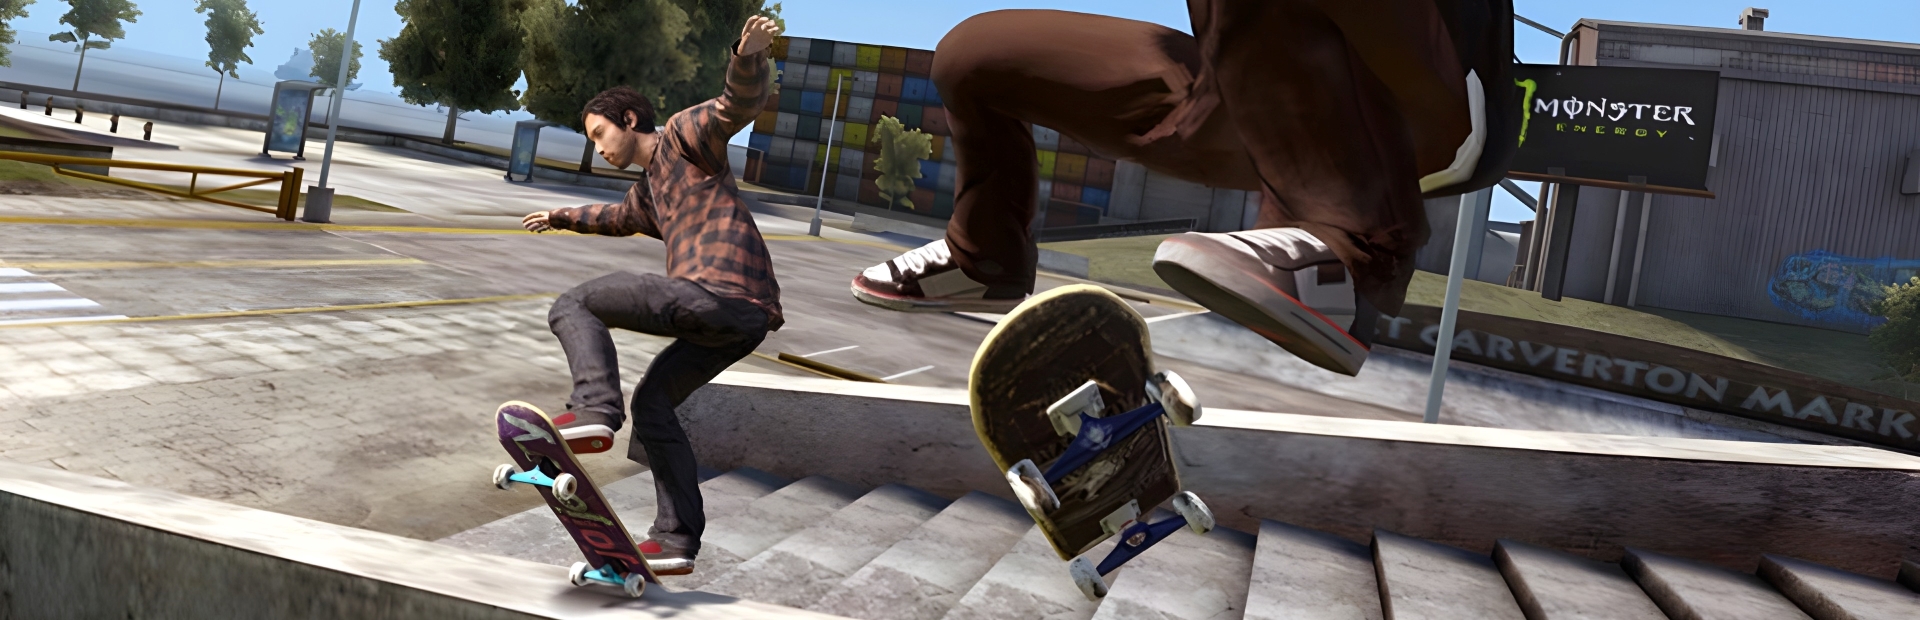 Anyone playing Skate 3 on the Deck? How does it perform? : r/SteamDeck